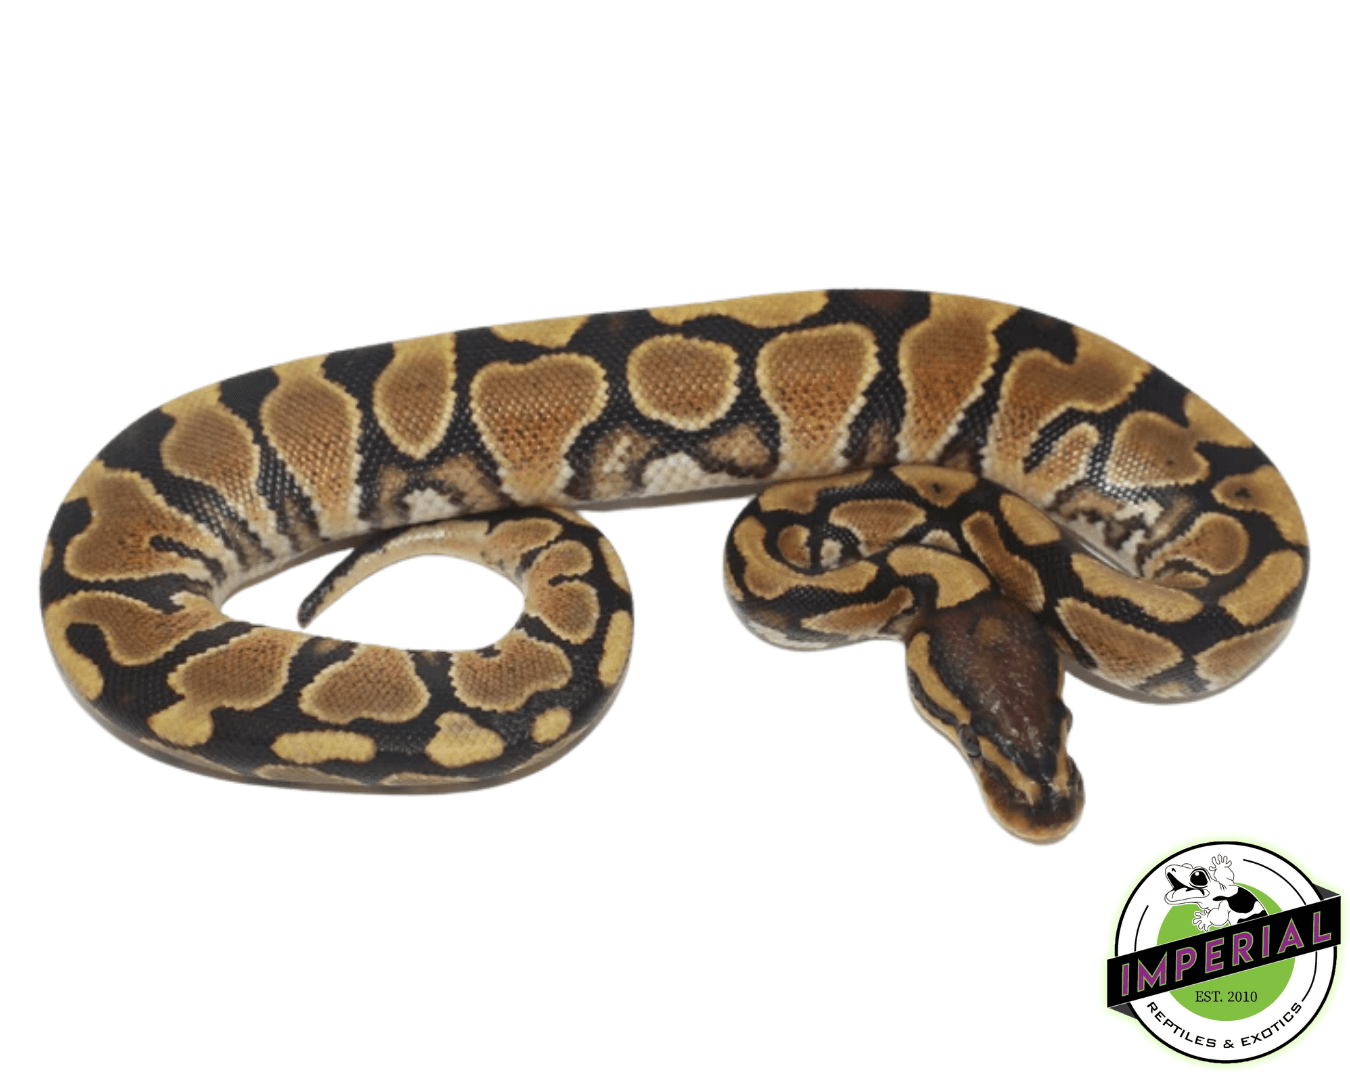 How Much Does A Ball Python Cost?